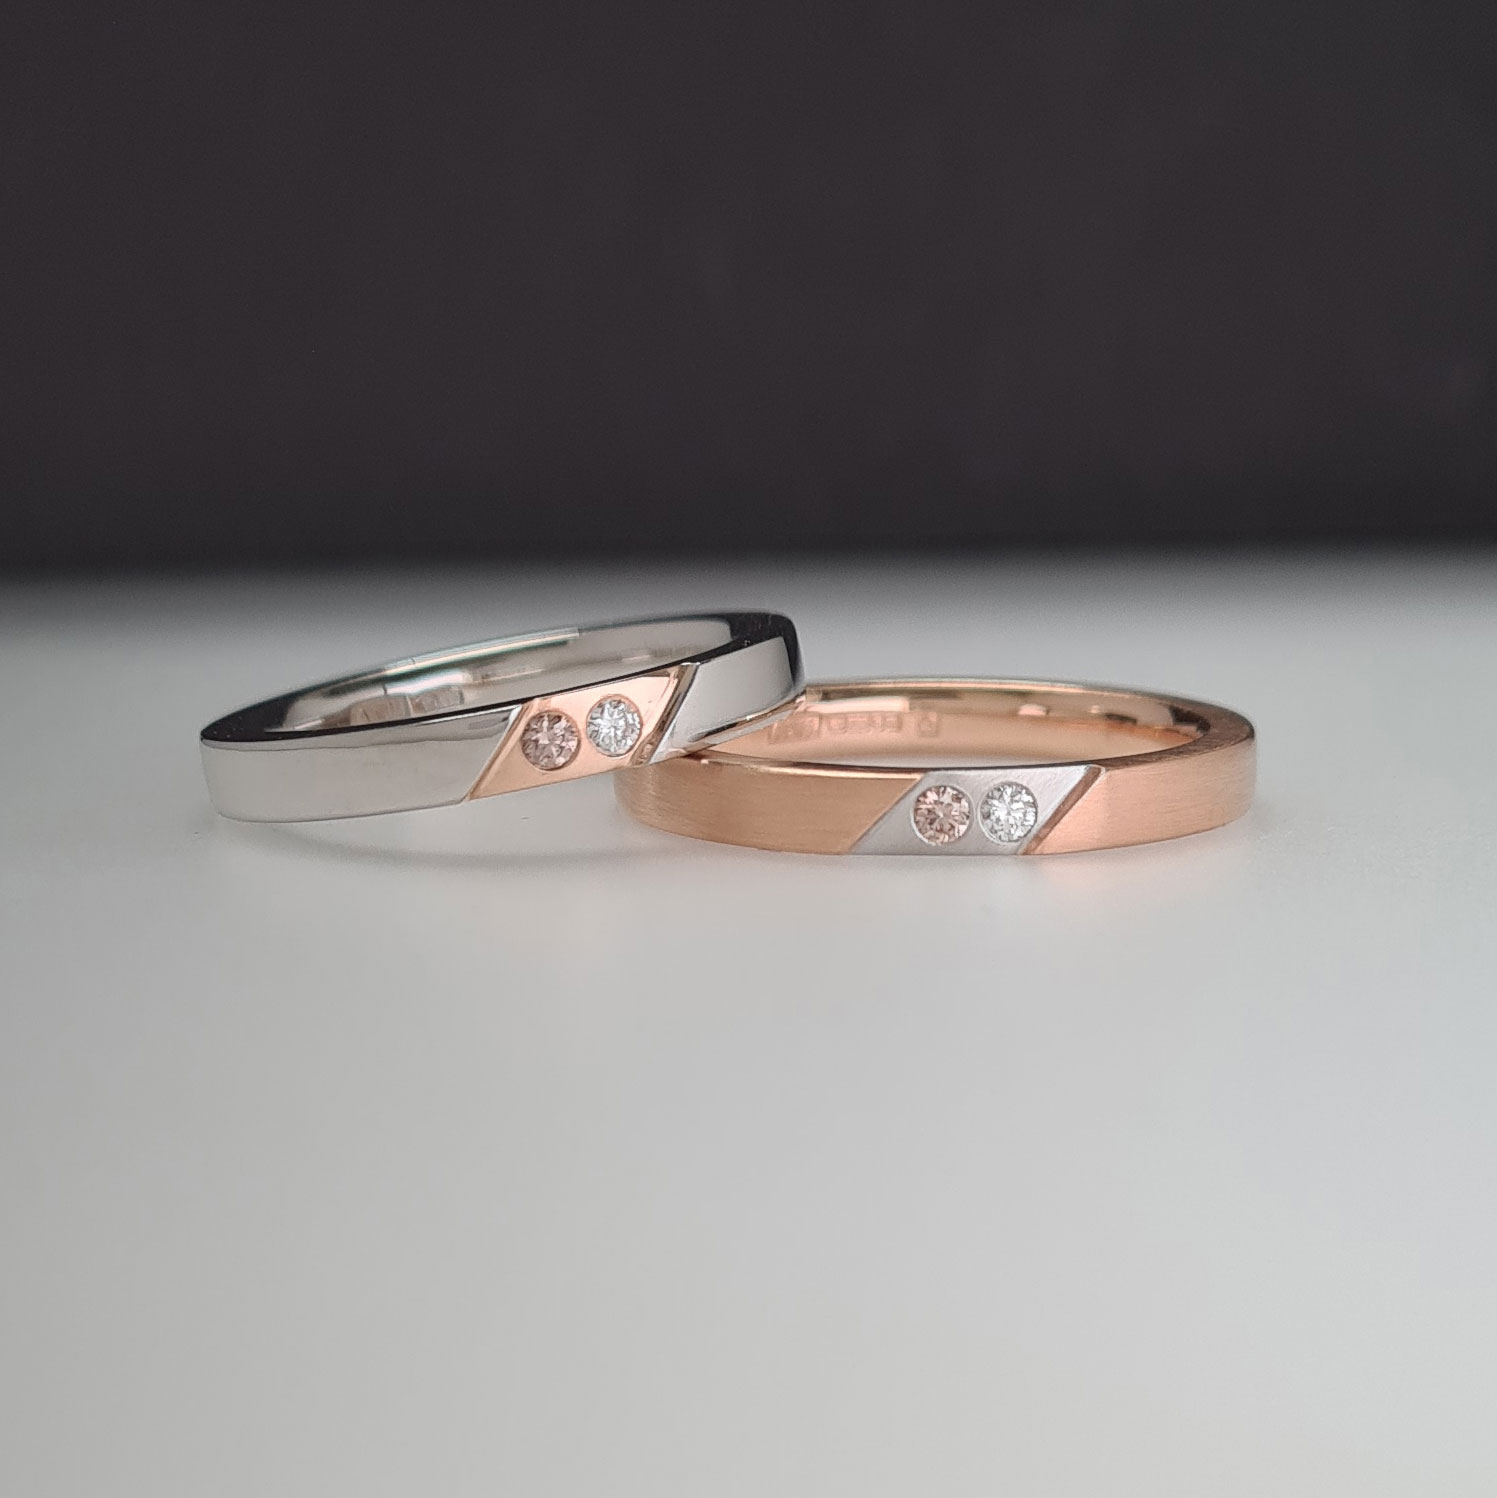 Two rings in rose gold and platinum with inset colourless and champagne diamonds on a black and white background.